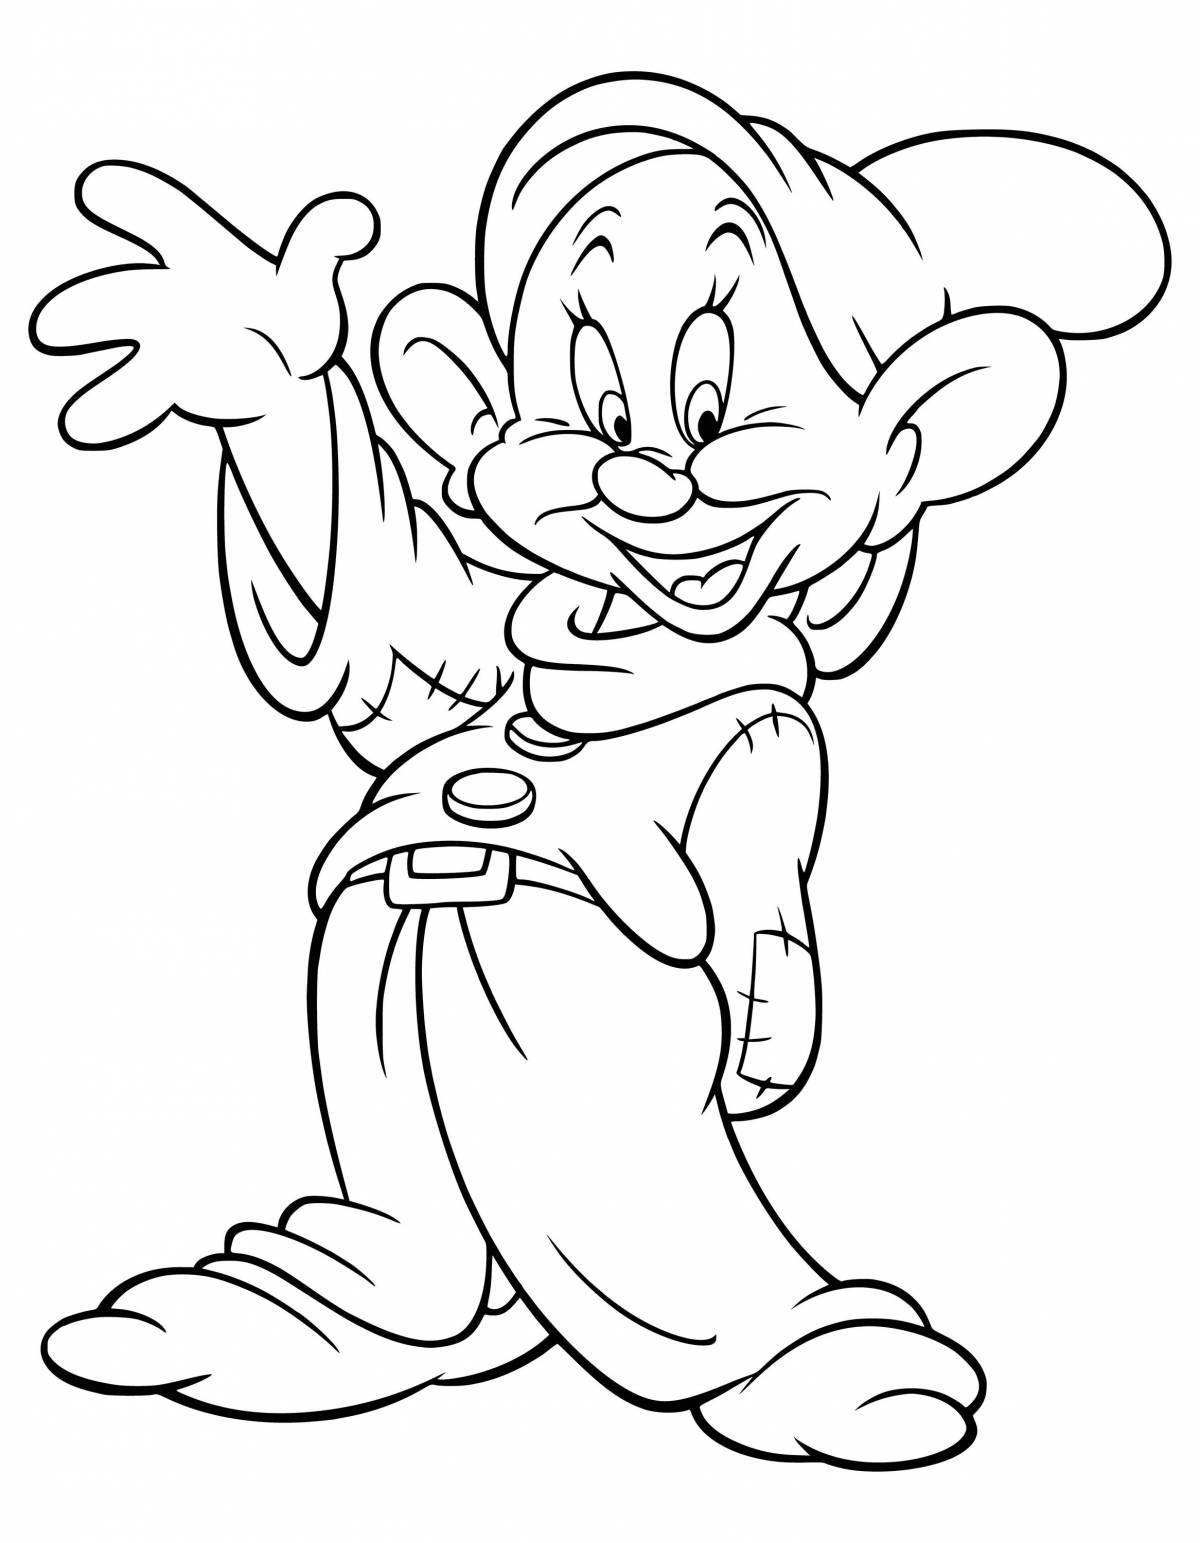 Coloring book quirky cartoon character